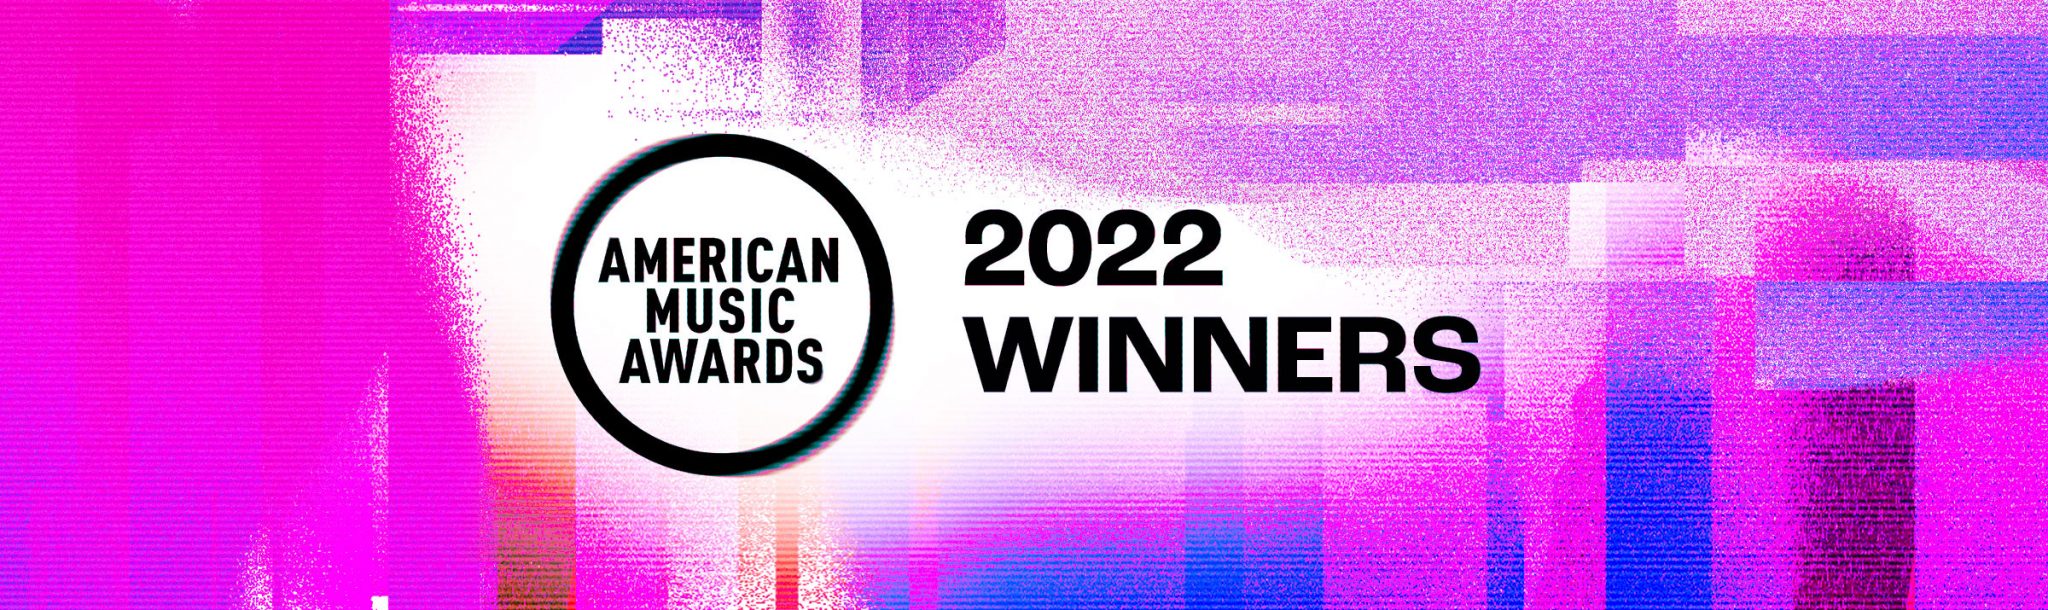 American Music Awards 2022 See The Full List Of Winners And Highlights 01 2048x610 